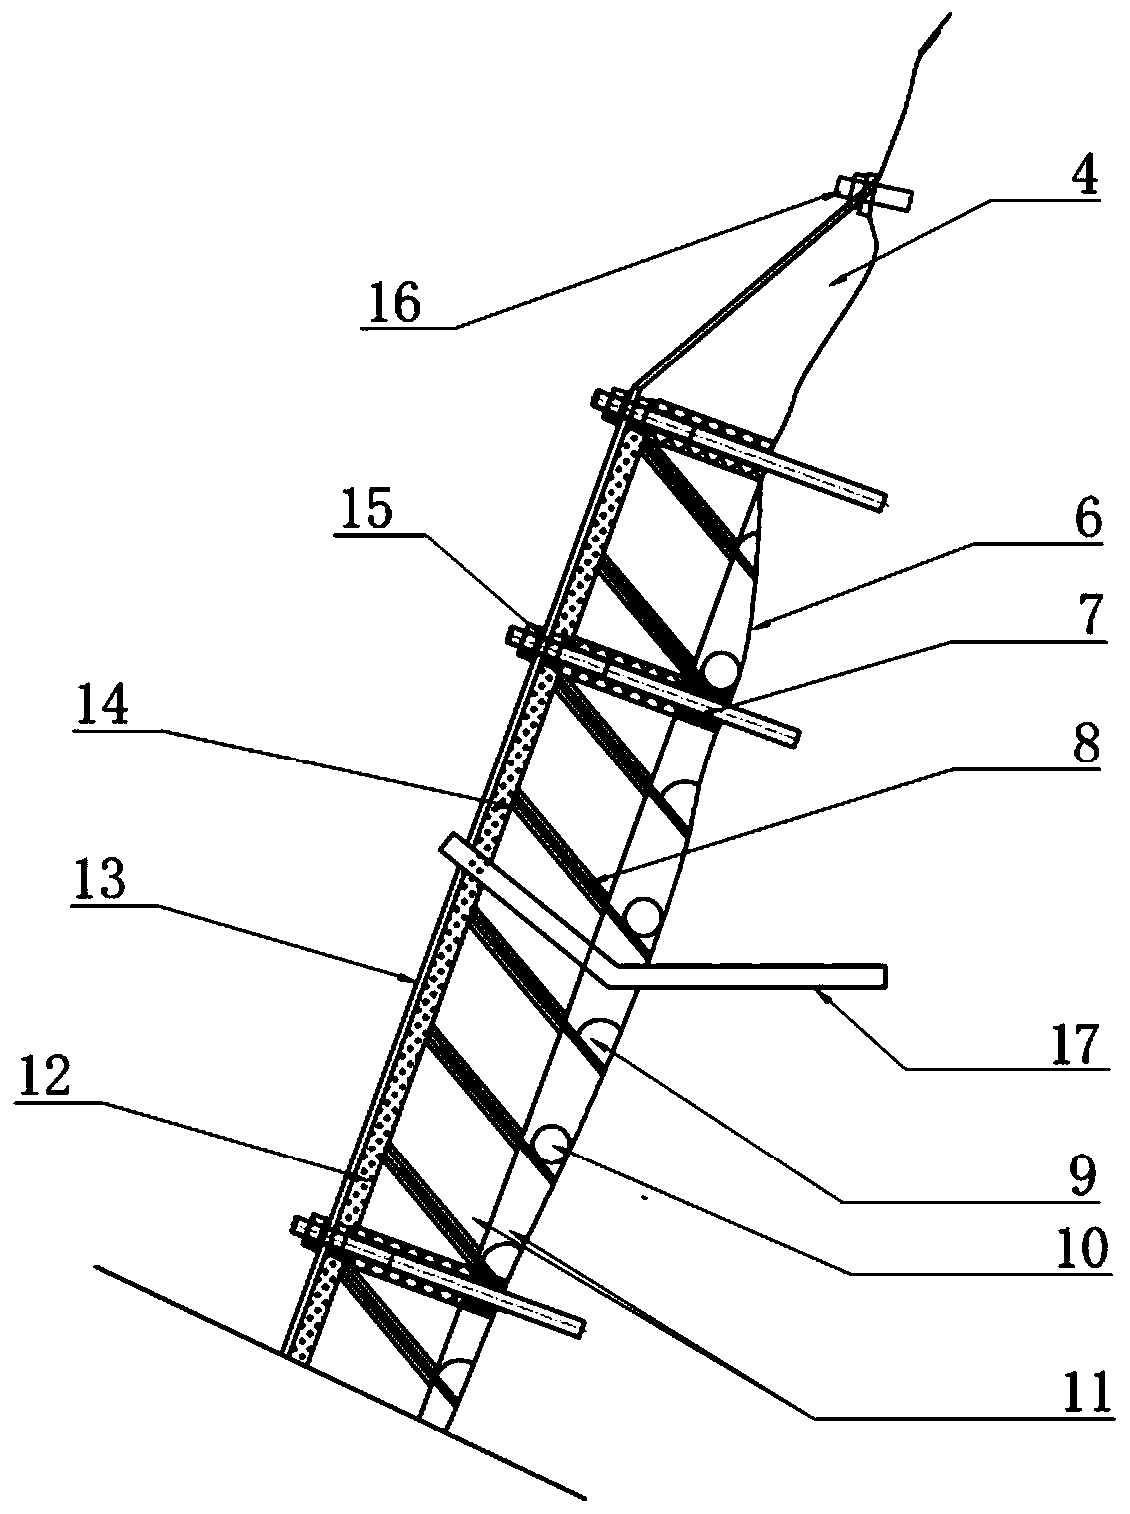 Plant measurement method for high and steep concrete and rock slope